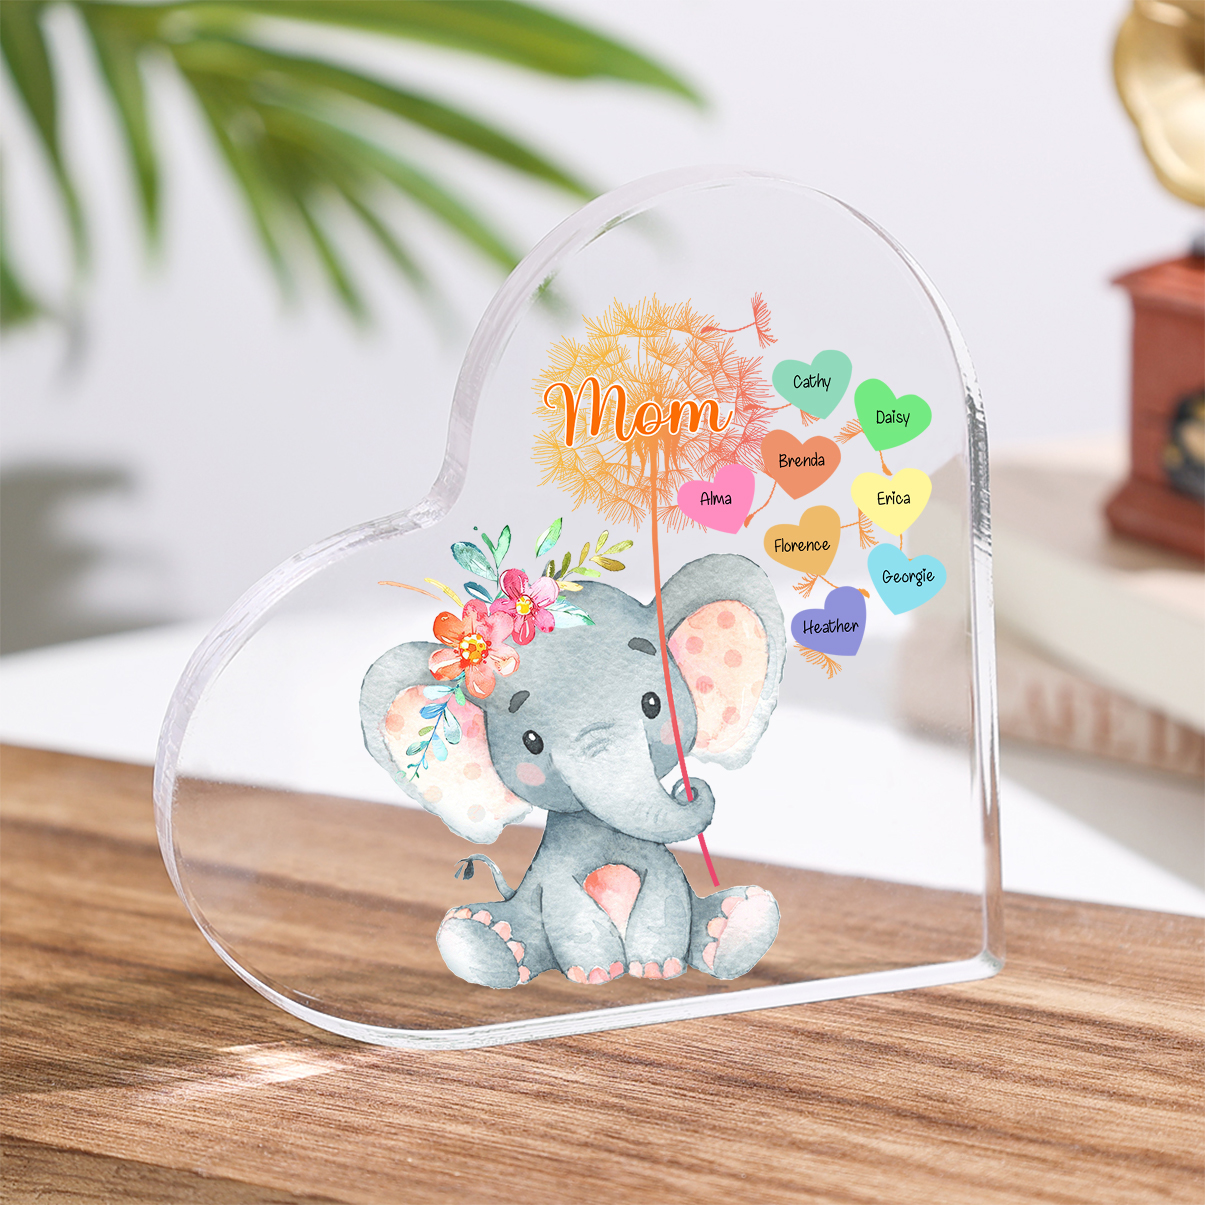 Customized 1-10 Names, Elephant Takes Dandelions tyle Acrylic Heart-shaped Decorative Brand Plaque Decoration for Mom